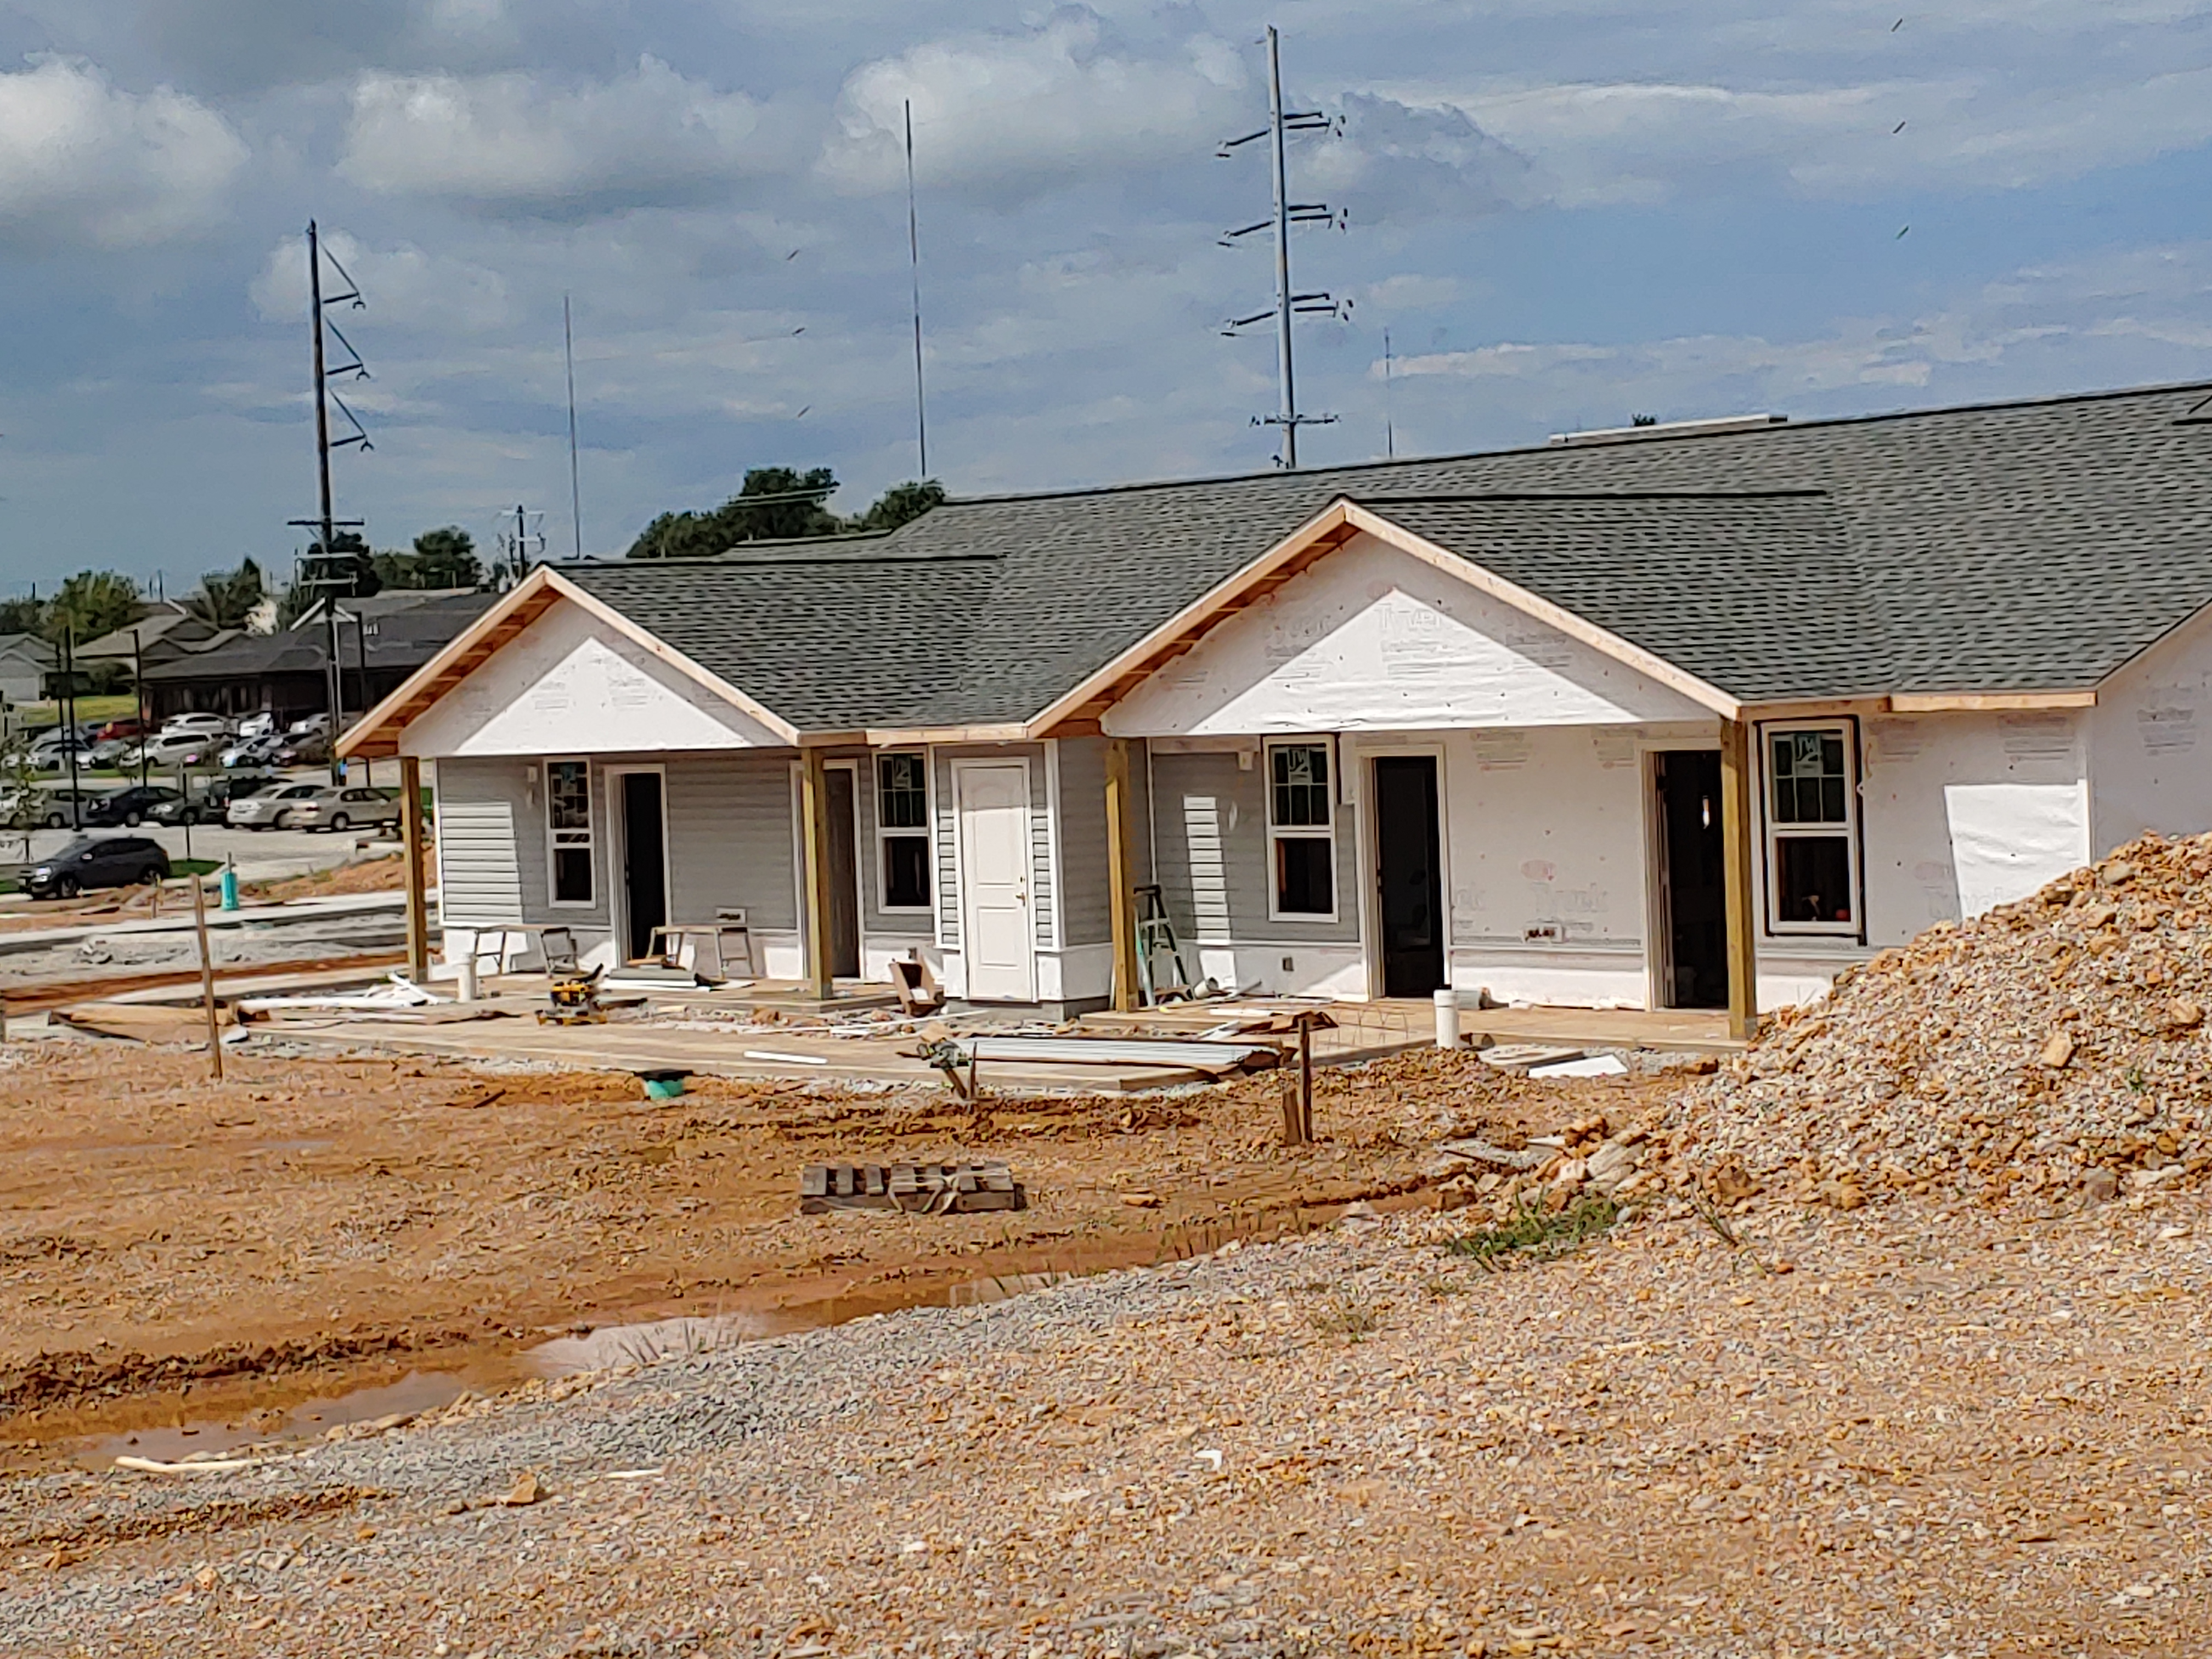 Joplin Bungalow's Has Roofs and Siding! 9.25.2019